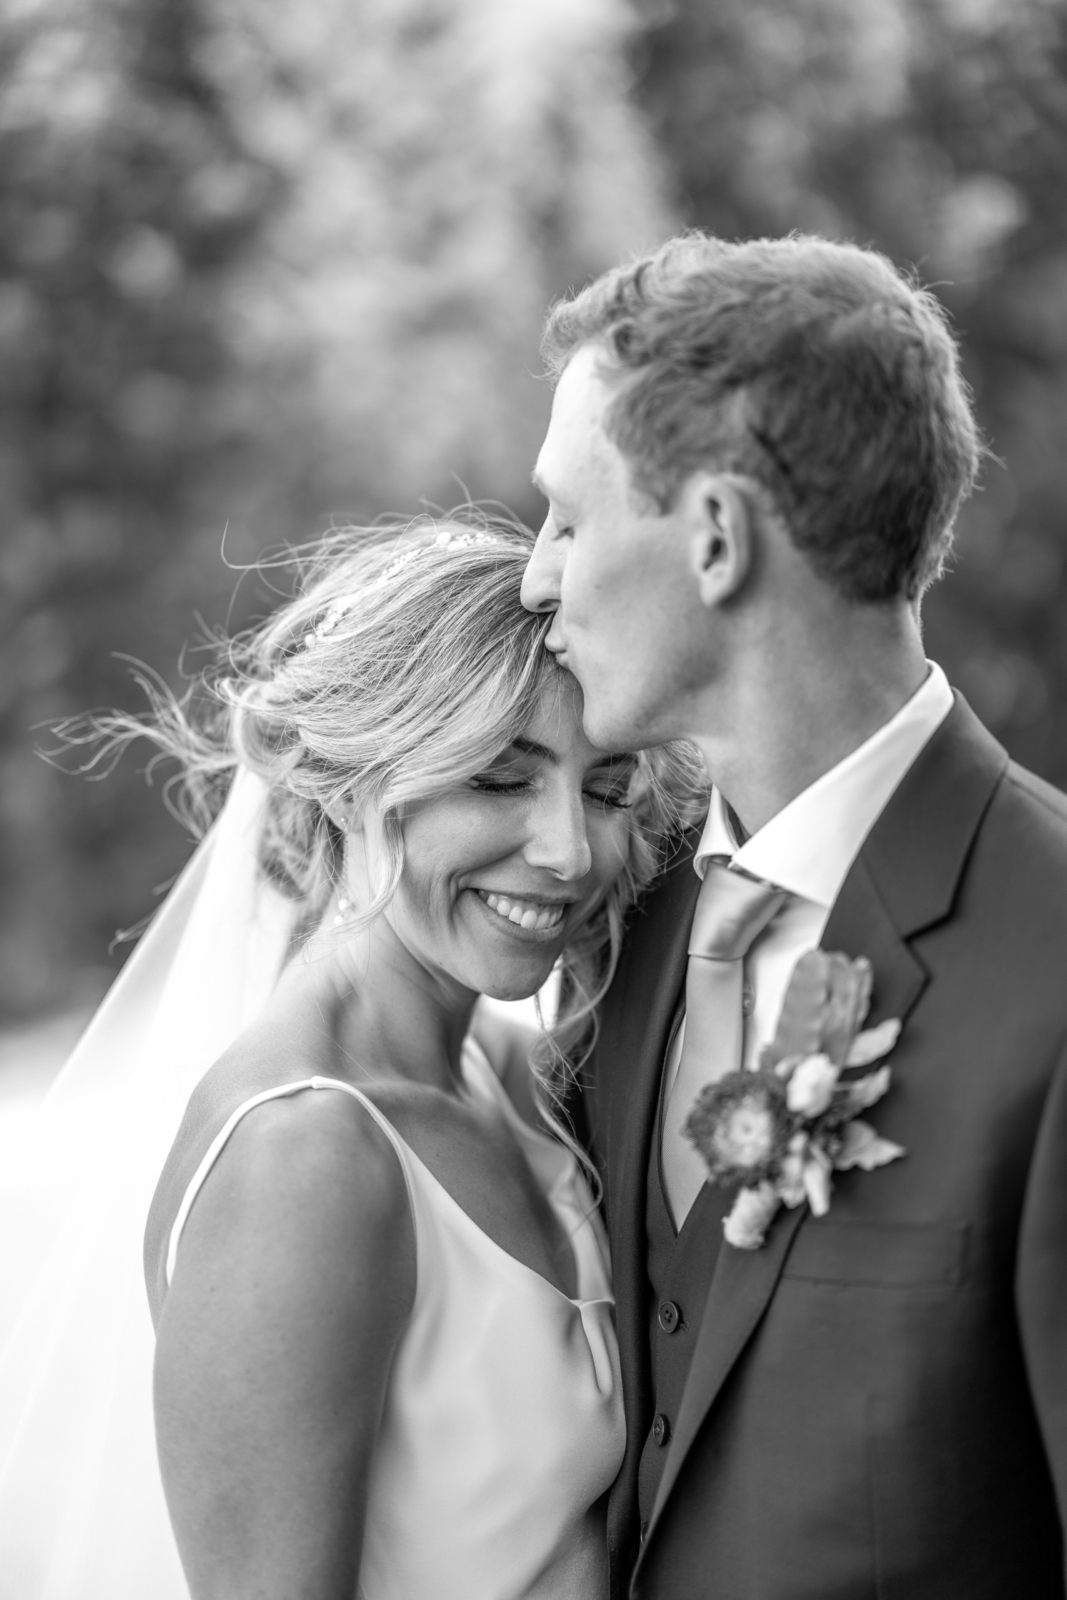 black and white wedding photos in nature